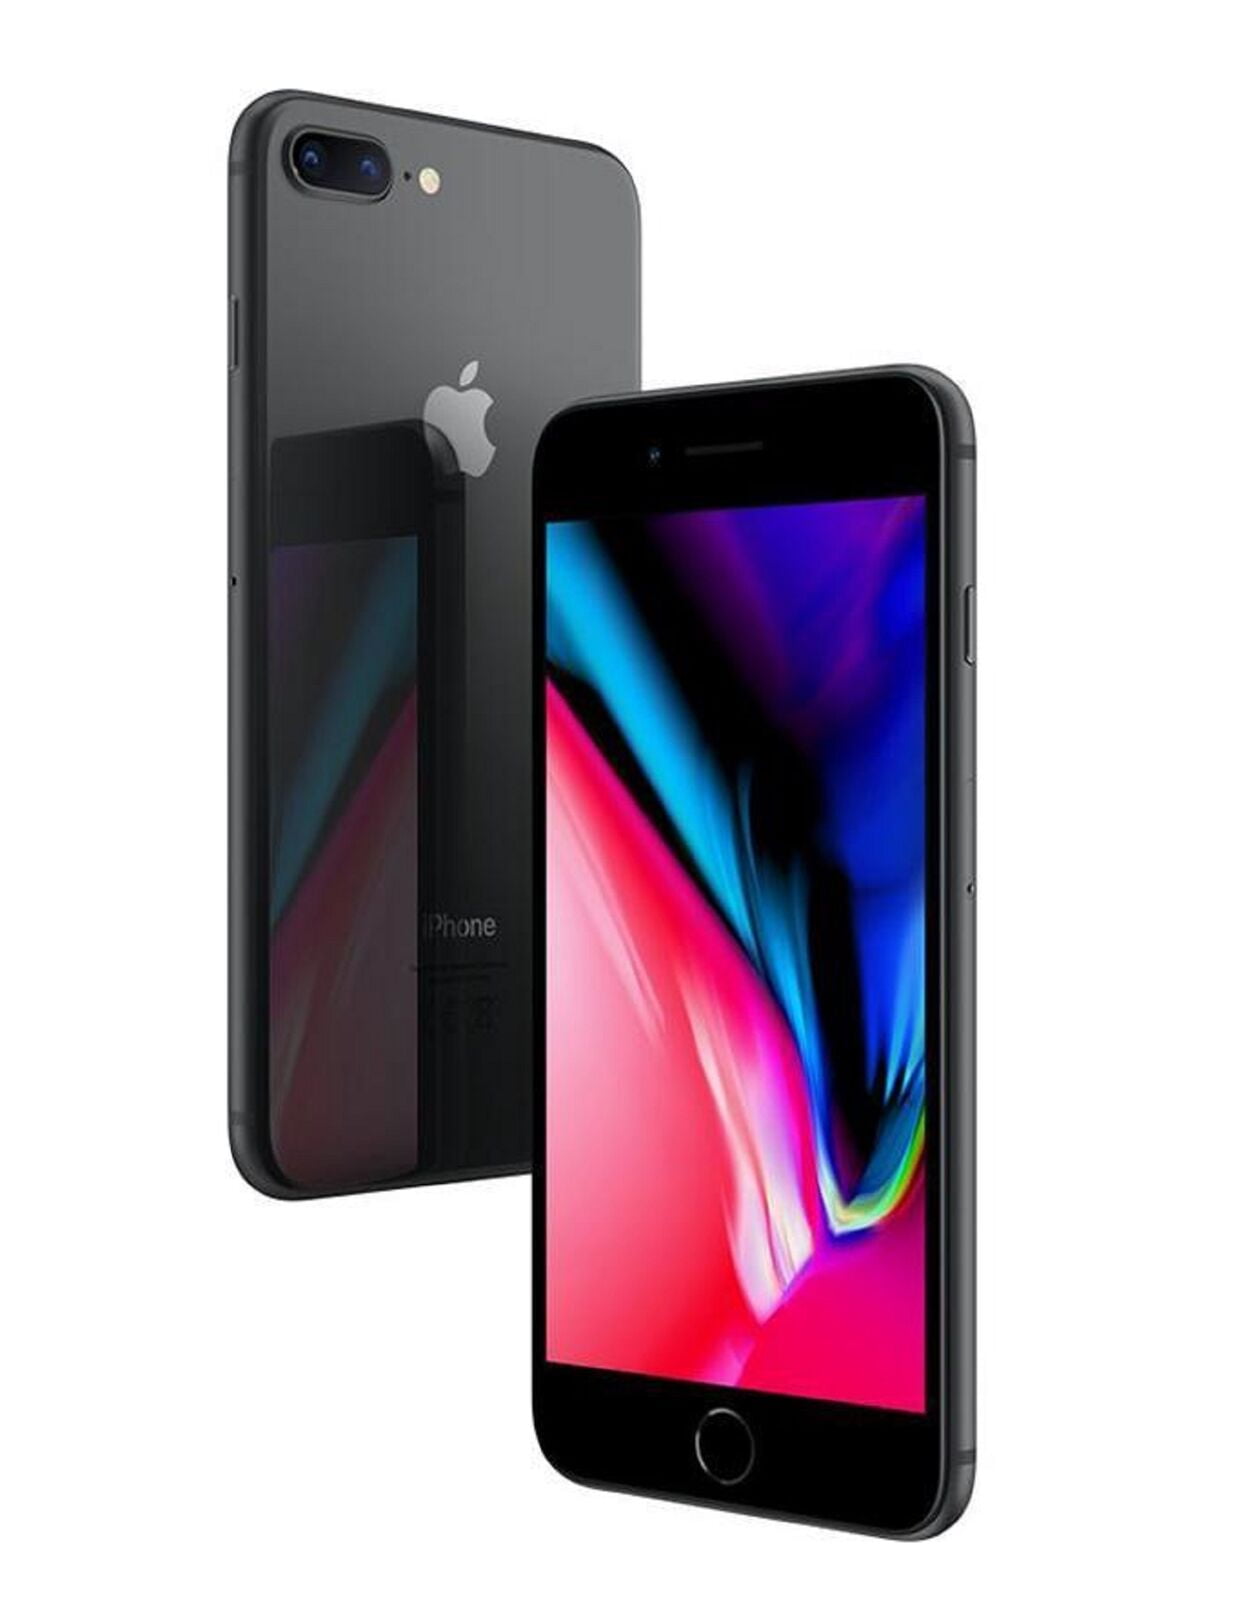 Pre-Owned Apple iPhone 8 Plus A1897 64GB Space Gray (US Model) - GSM  Unlocked Cell Phone (Refurbished: Like New)